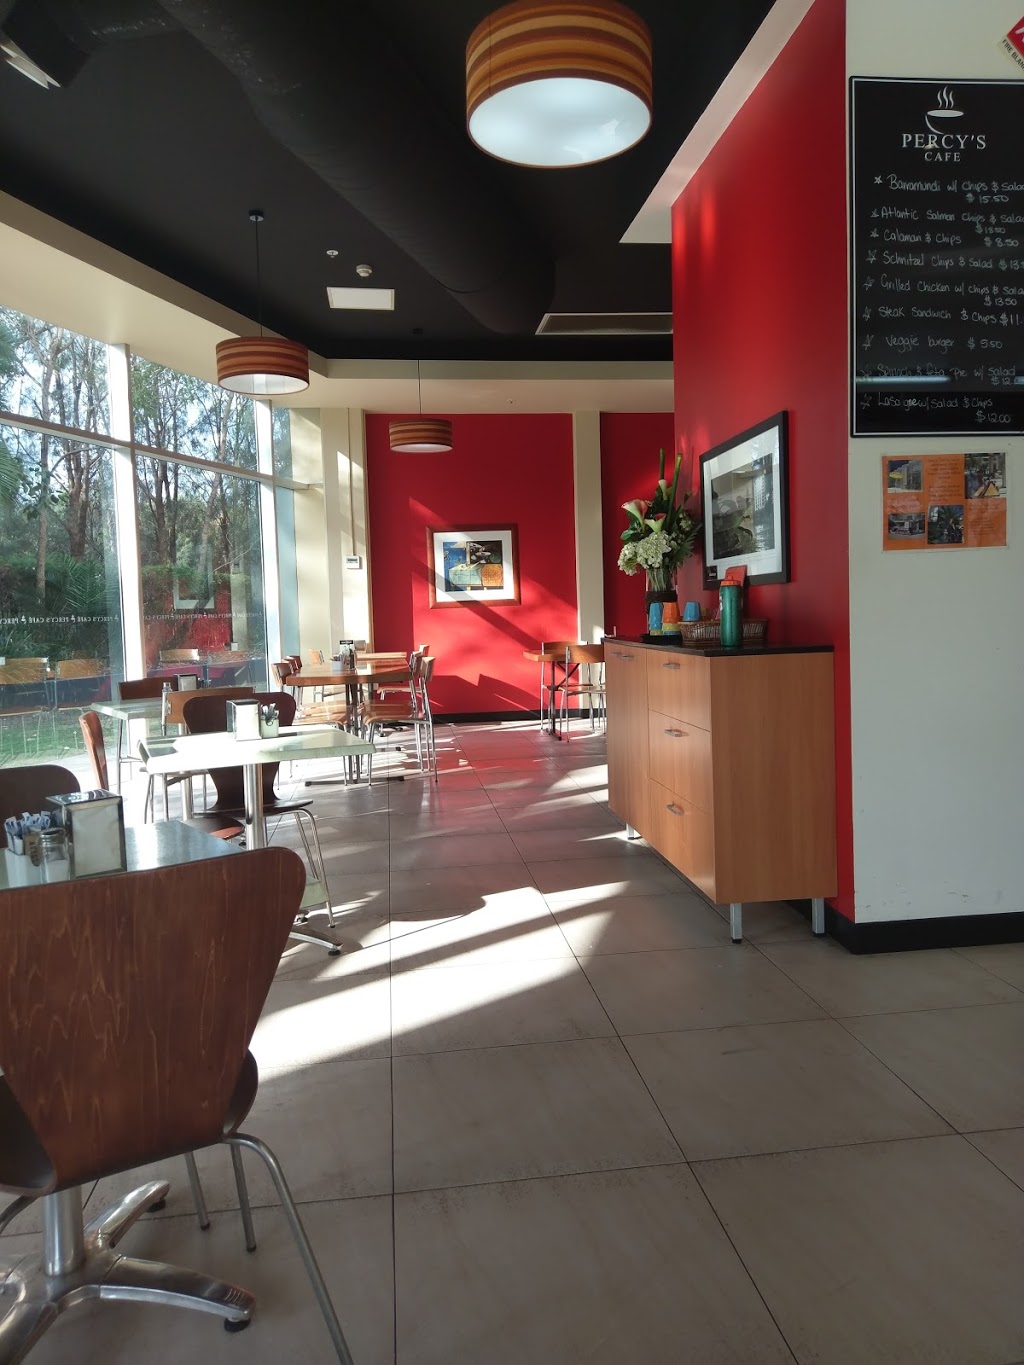 Percys Cafe | cafe | 4 Northumberland Rd, Caringbah NSW 2229, Australia | 0295267176 OR +61 2 9526 7176